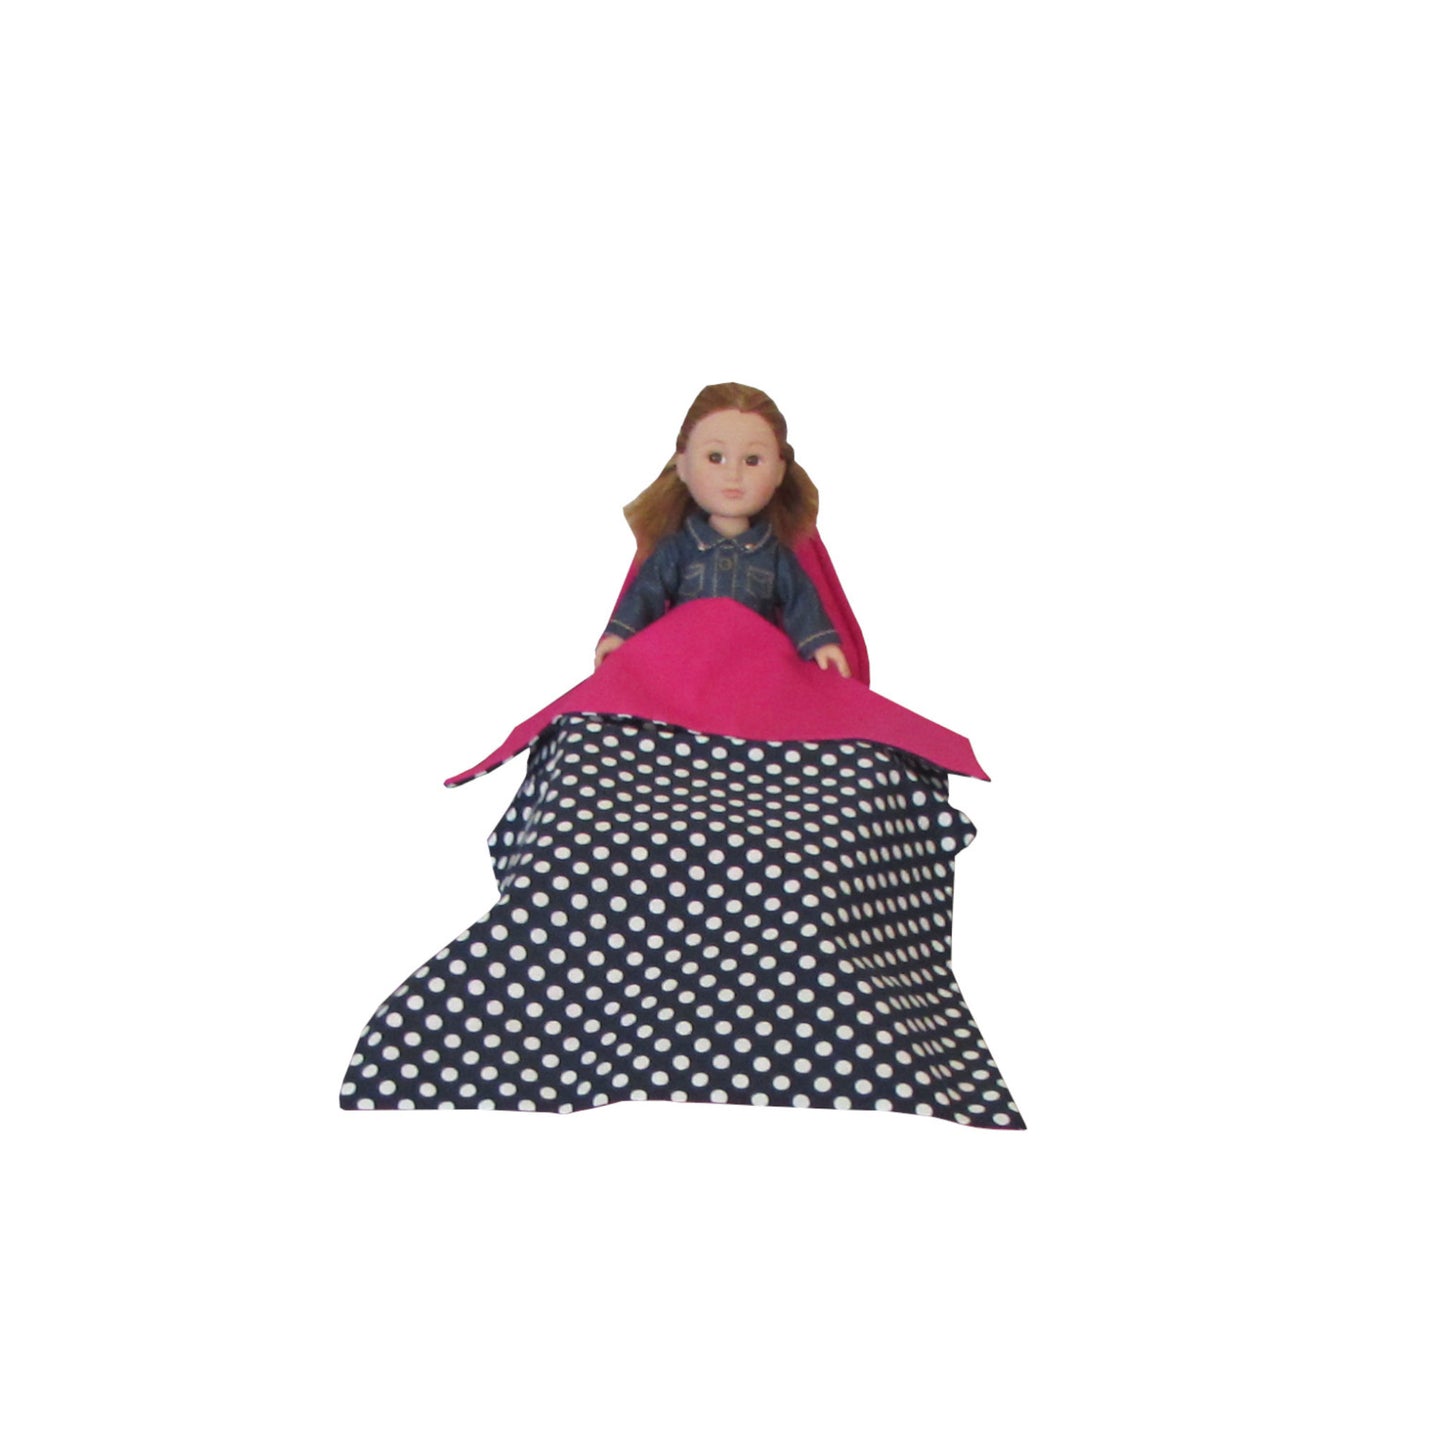 Bright Pink Doll Bed and Dots Dark Blue Doll Bedding for 6.5-inch dolls with doll Third view